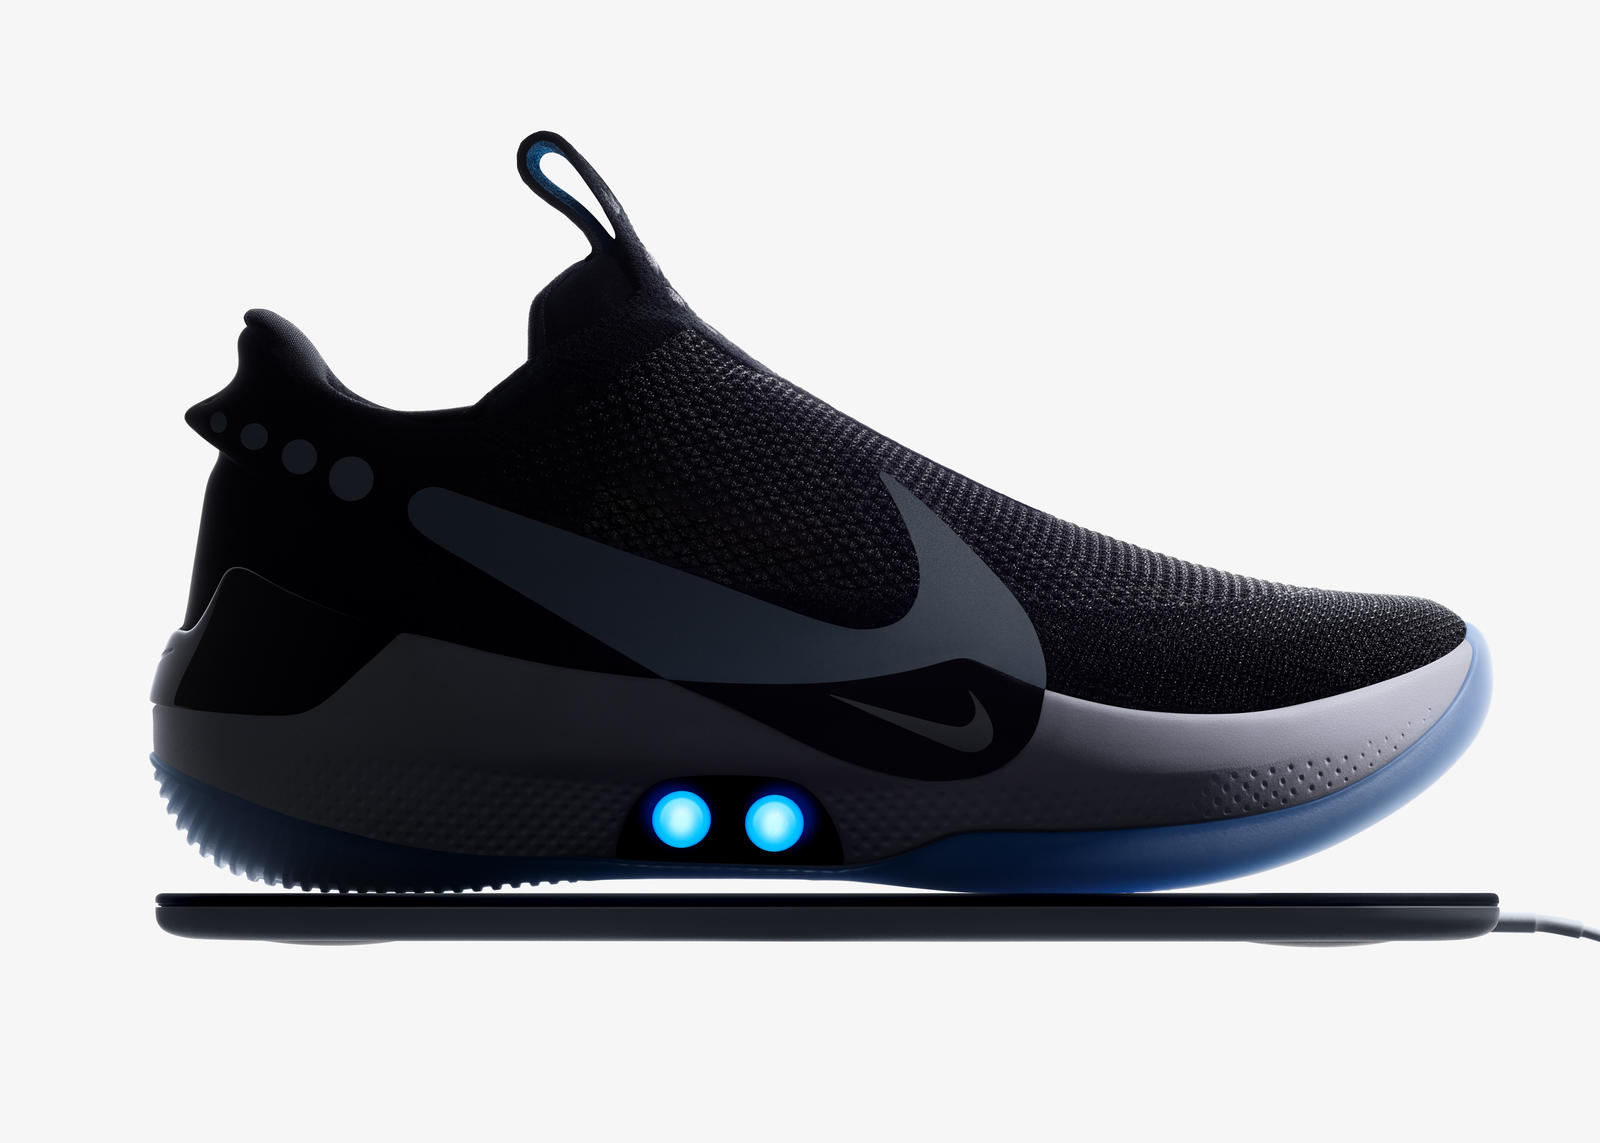 Nike kills shoelaces with new iPhone 